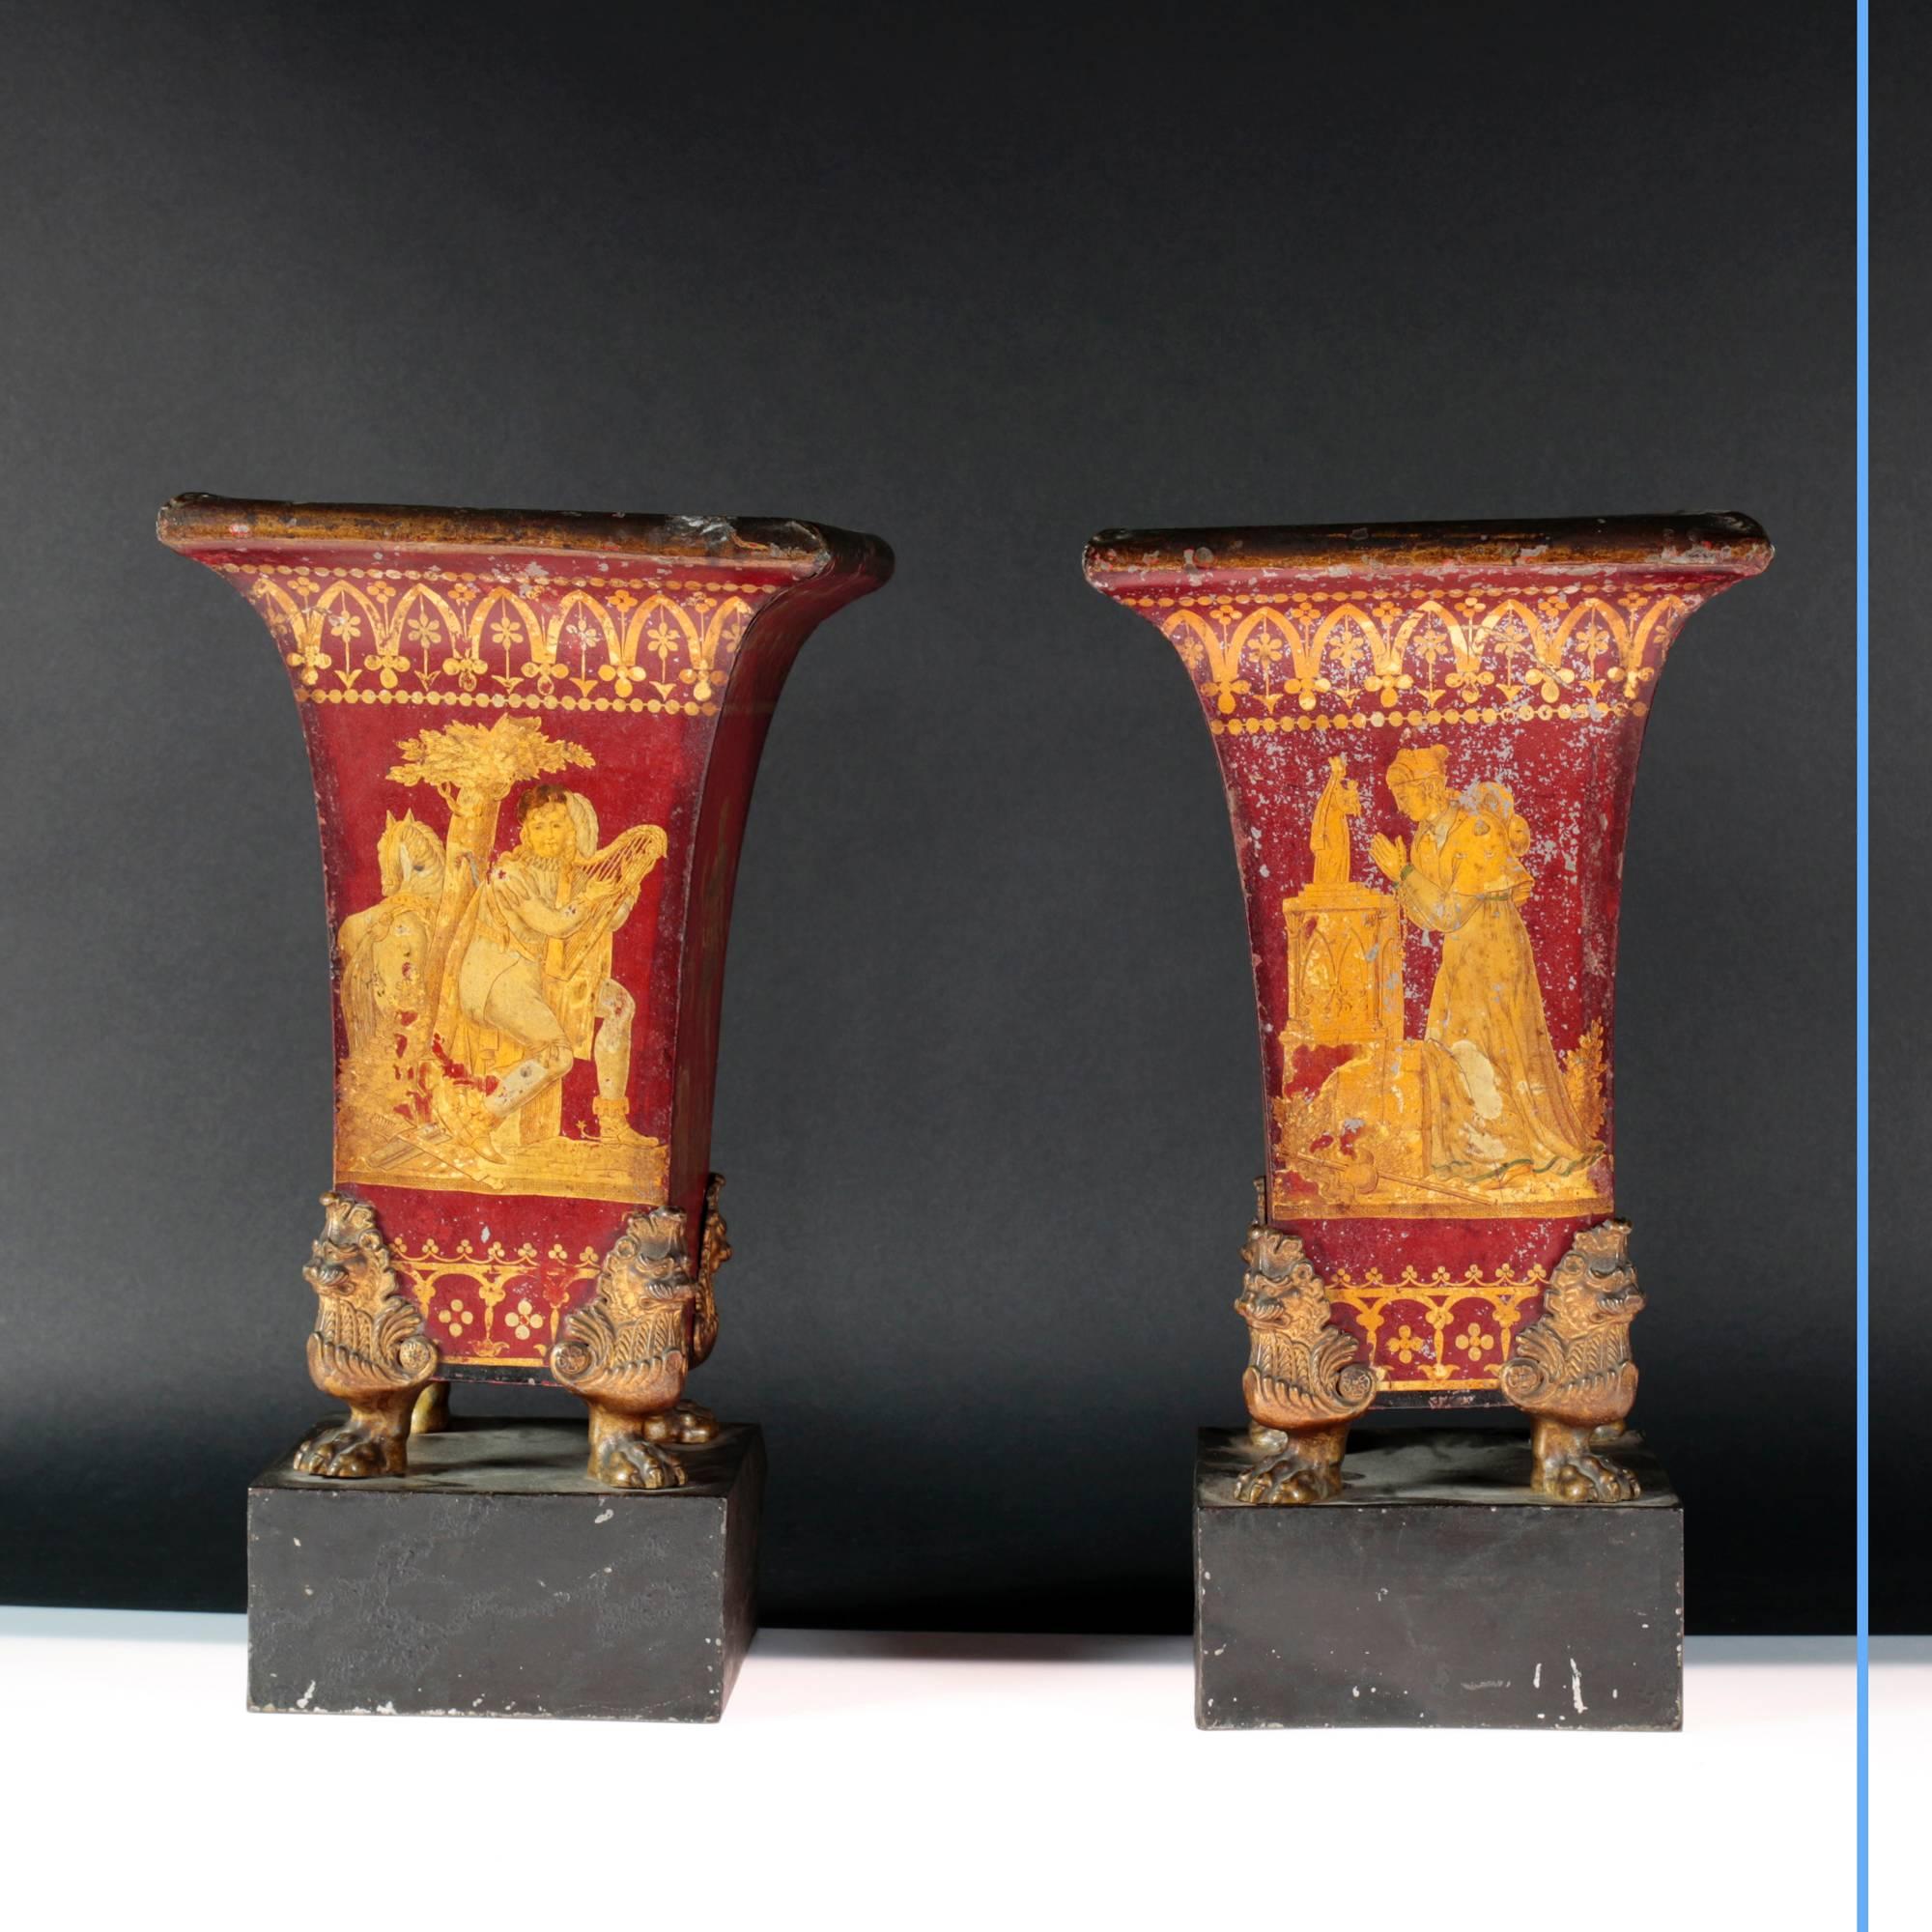 Painted Pair of Sheet Metal Vases in Gothic Revival Style, 19th Century For Sale